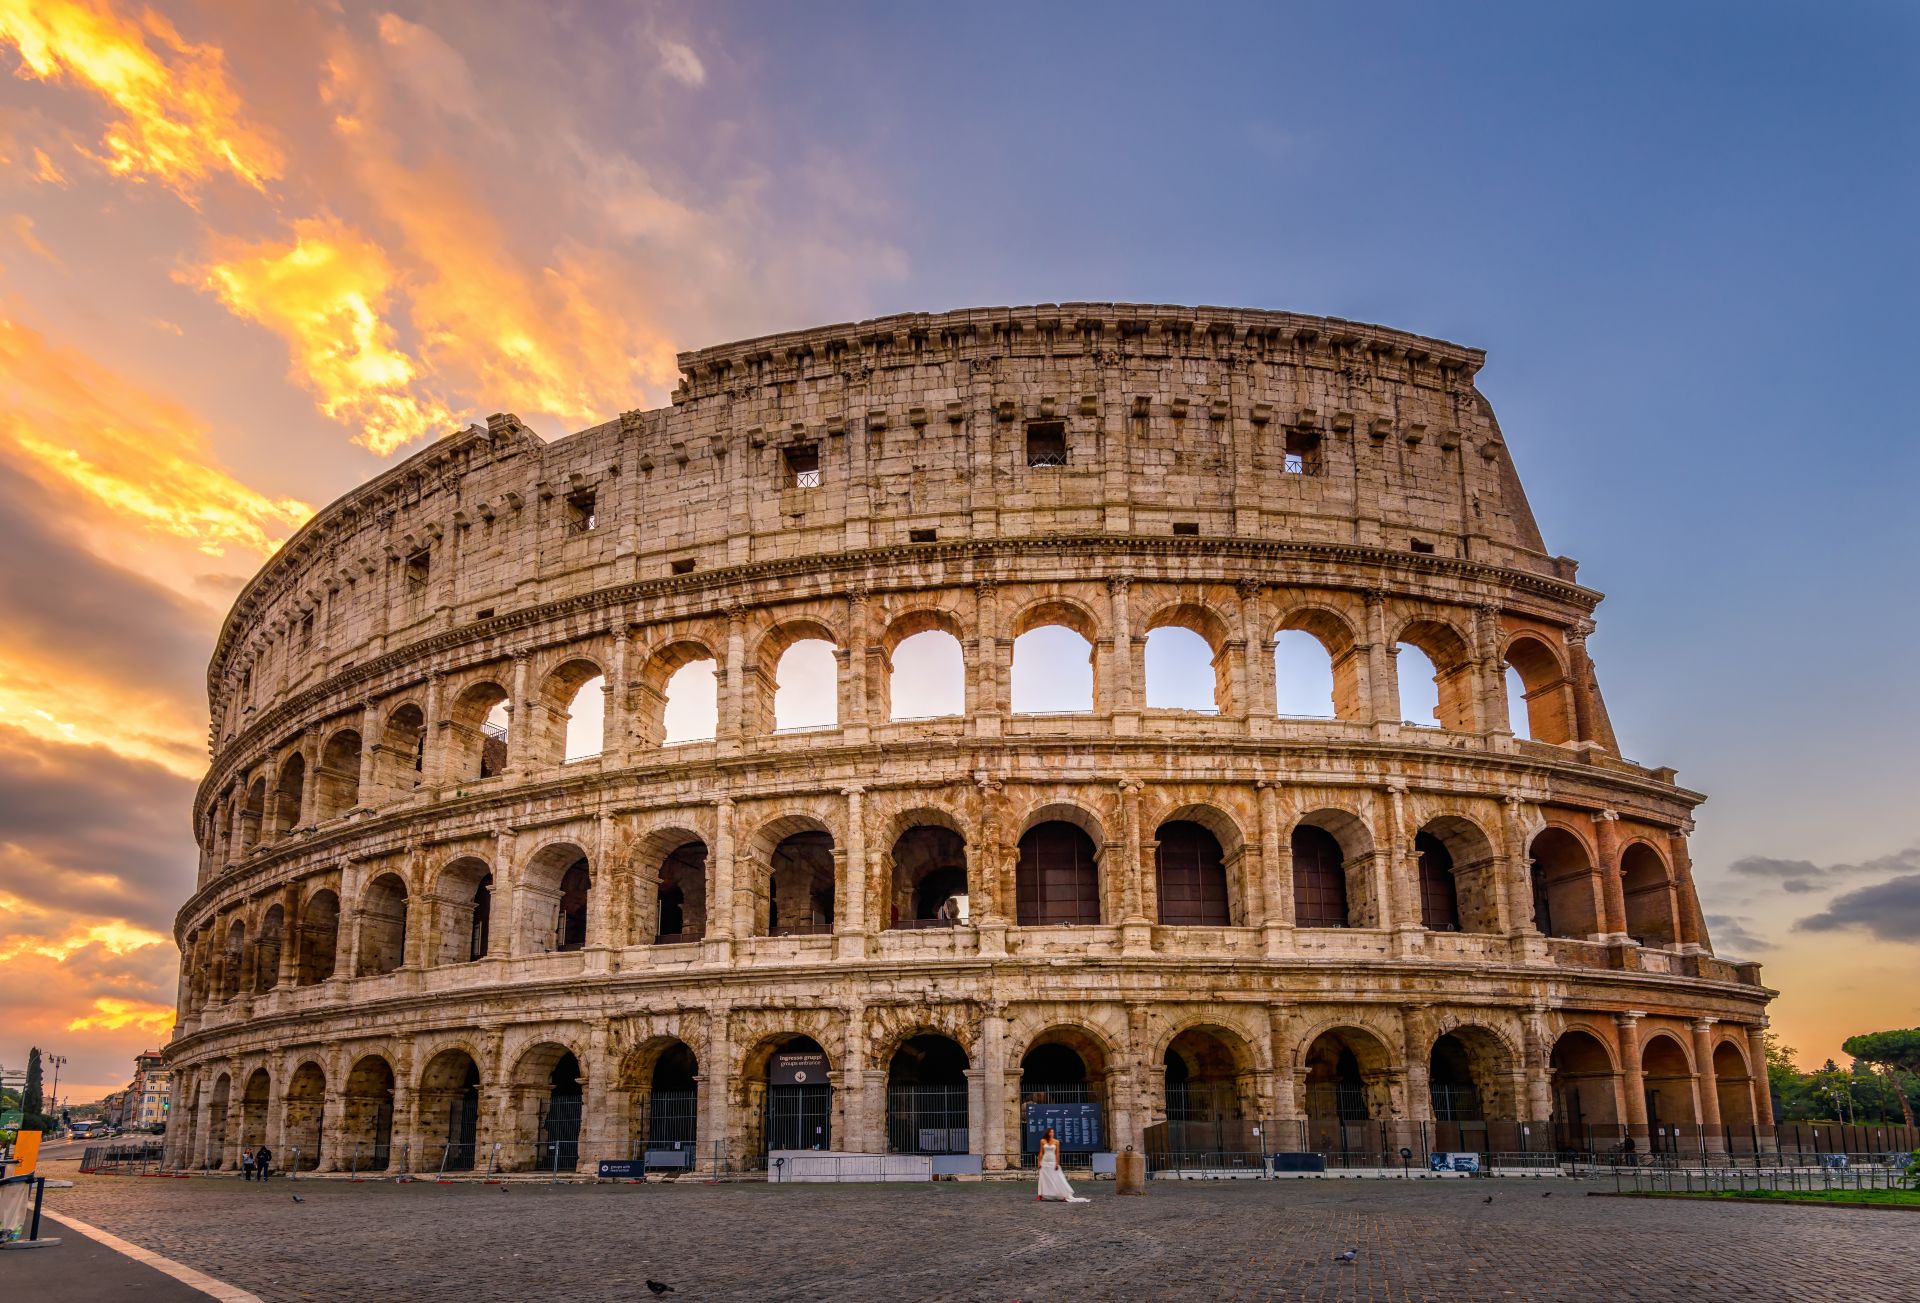 View of the Colosseum in Rome and morning sun, Italy, Europe.